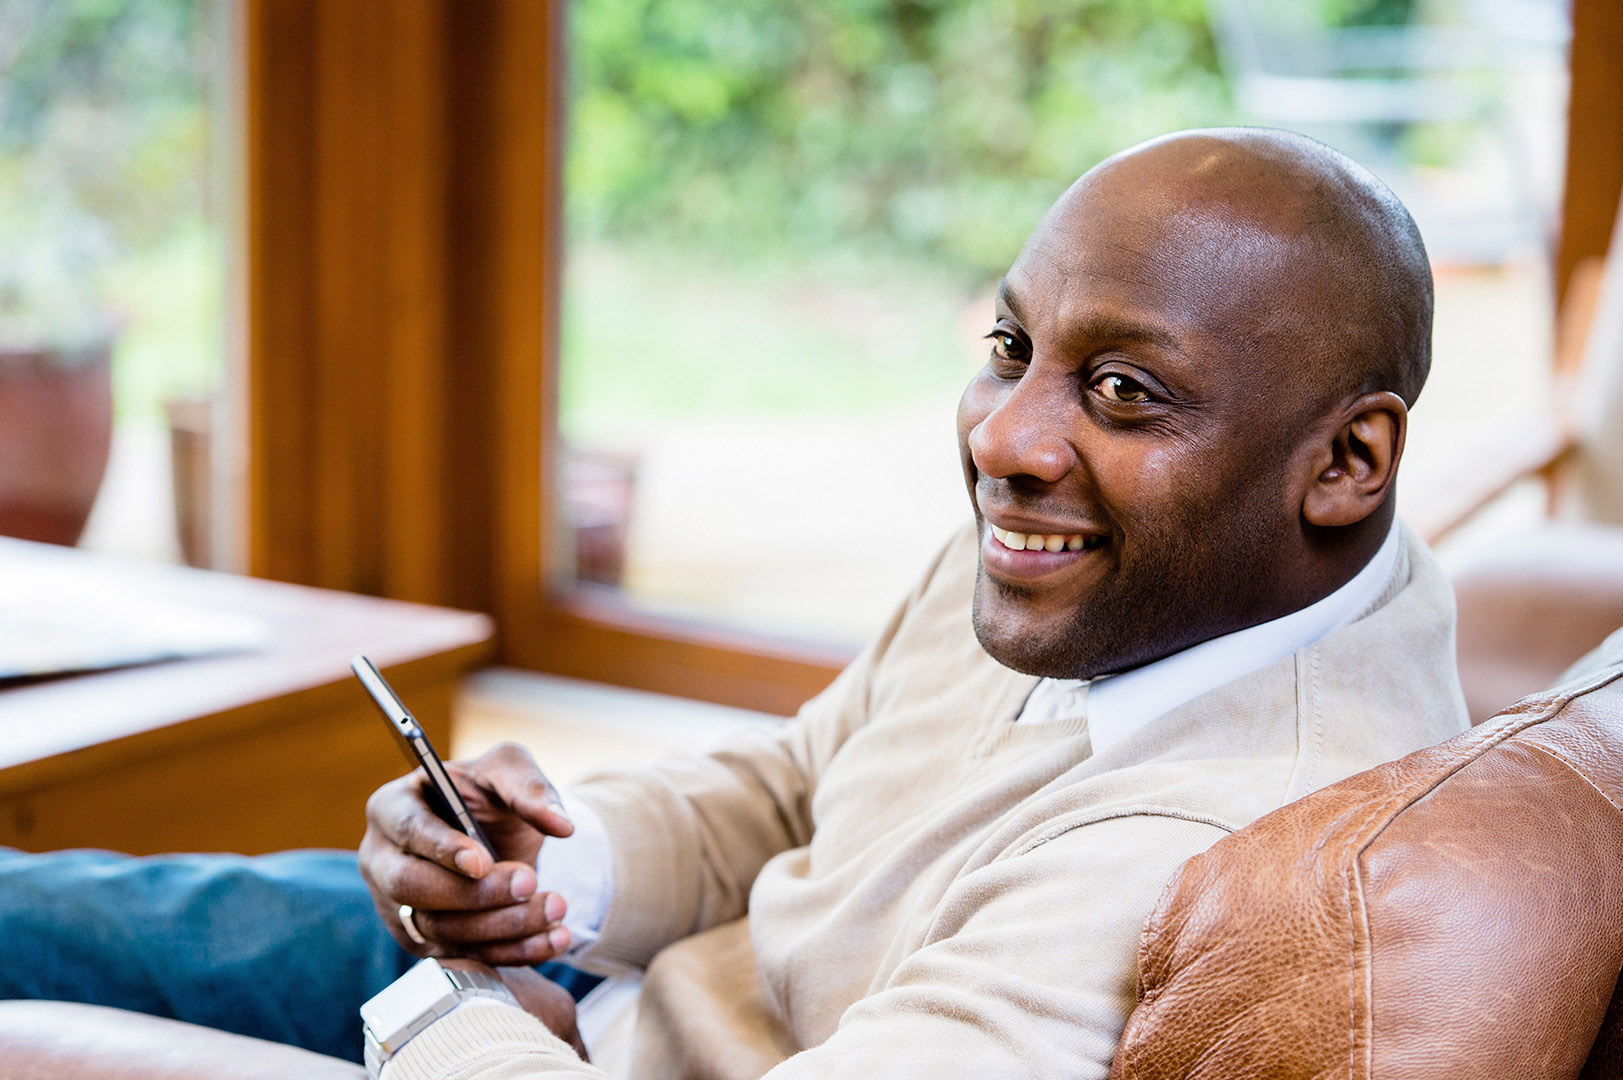 Black man in conversation off camera holding mobile phone